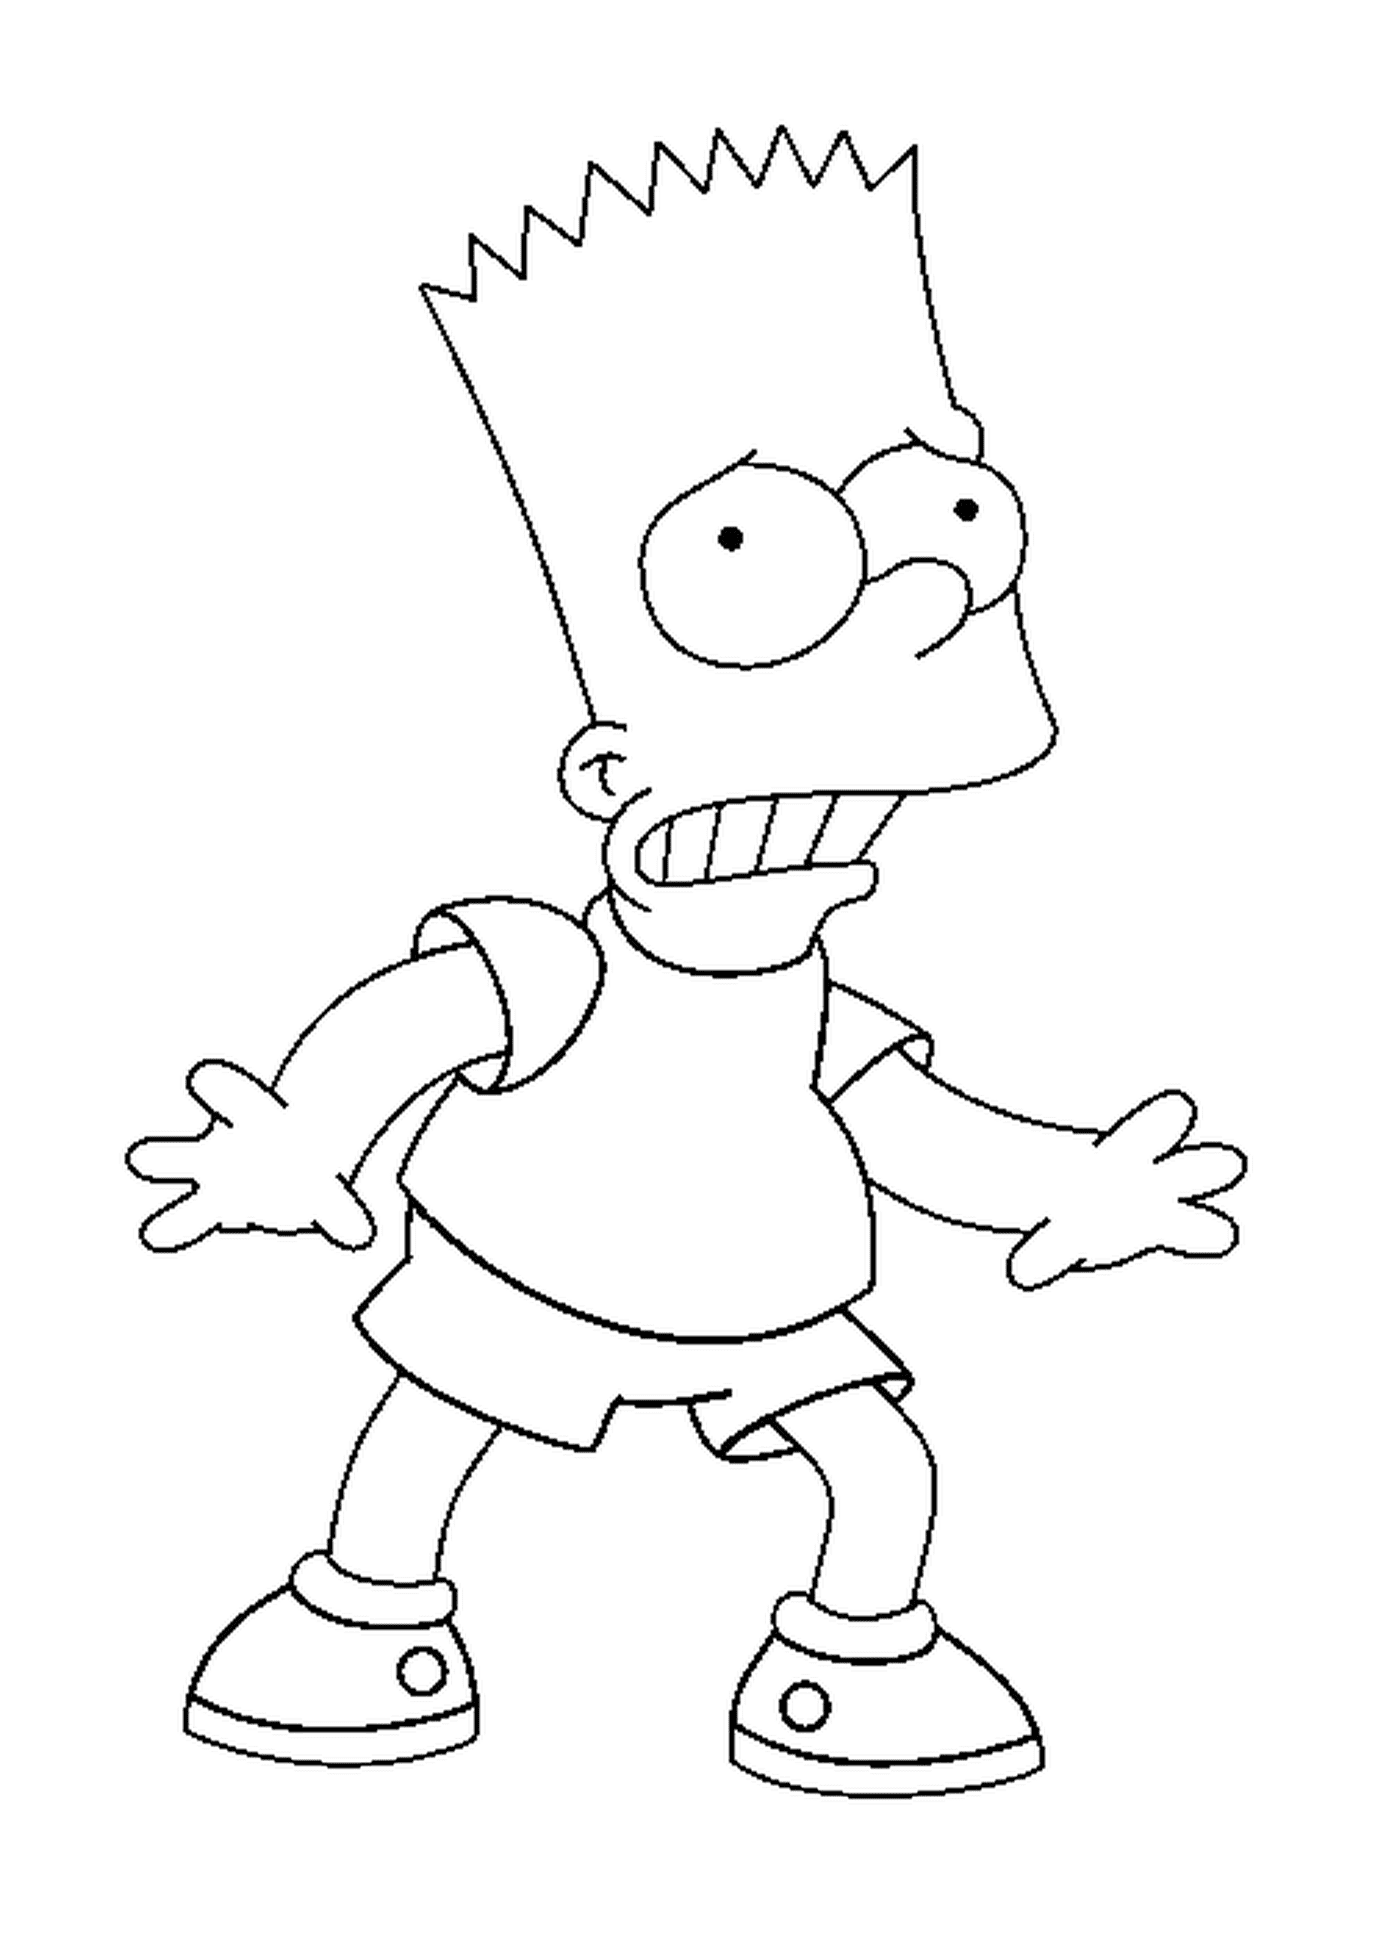  Bart has a scared expression 